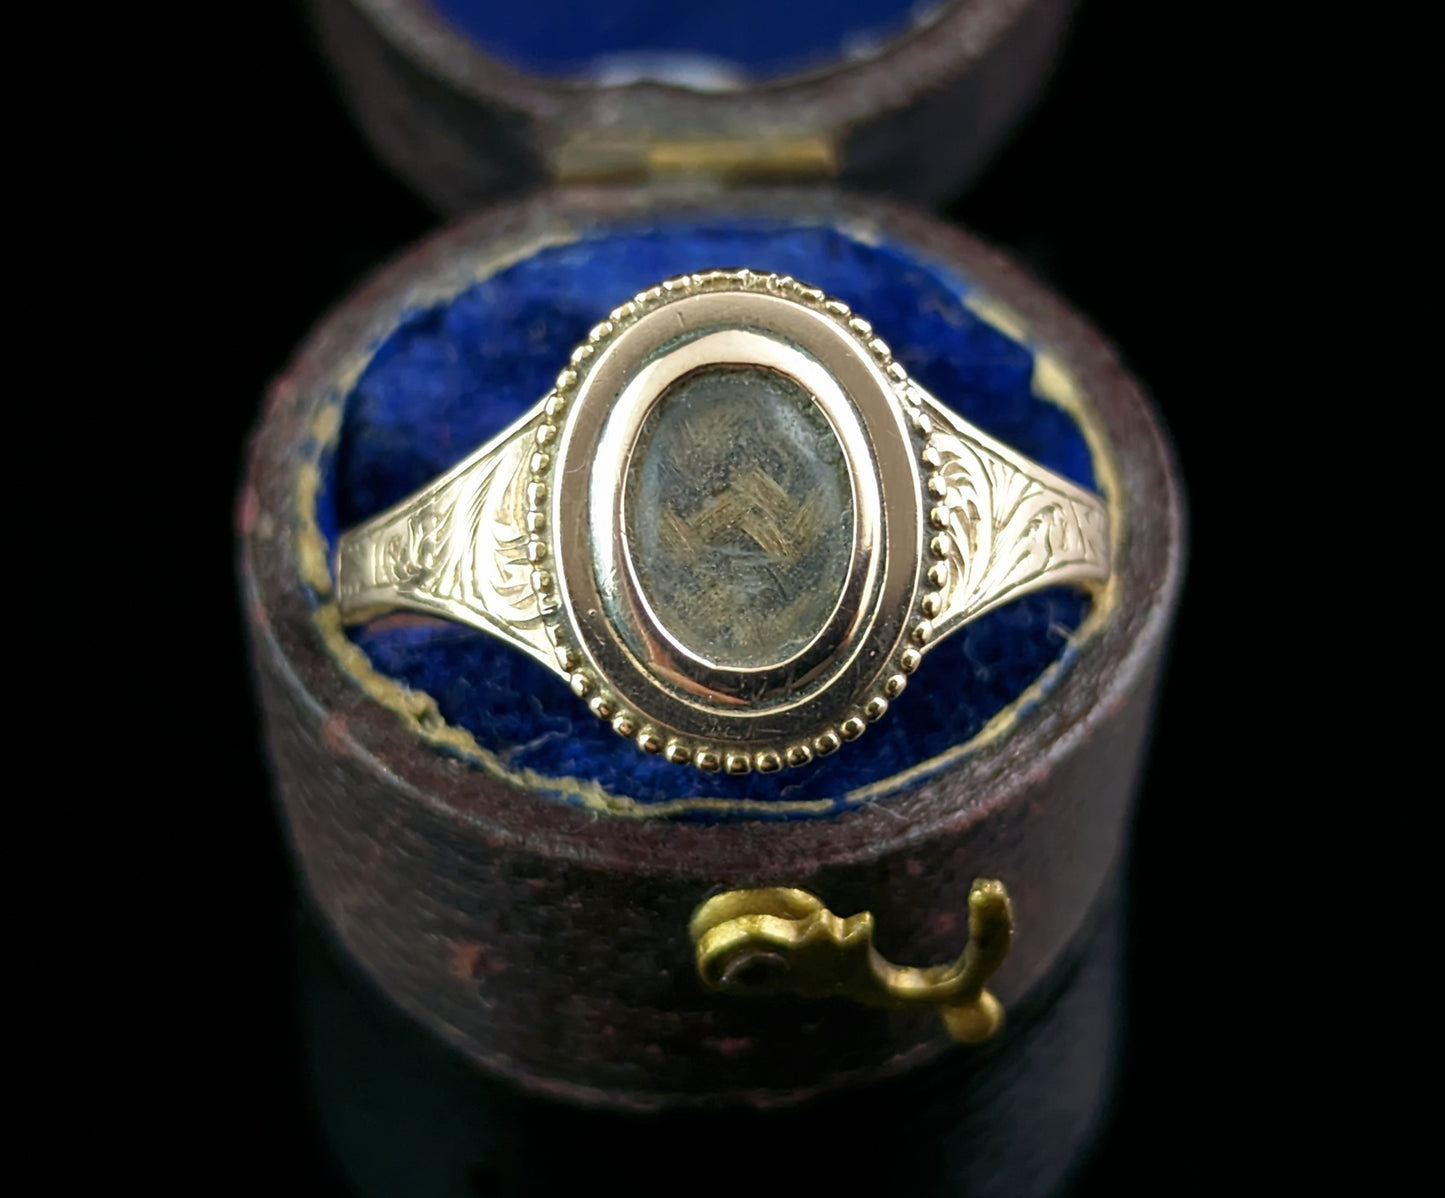 Antique Victorian 9ct gold and Hairwork mourning ring